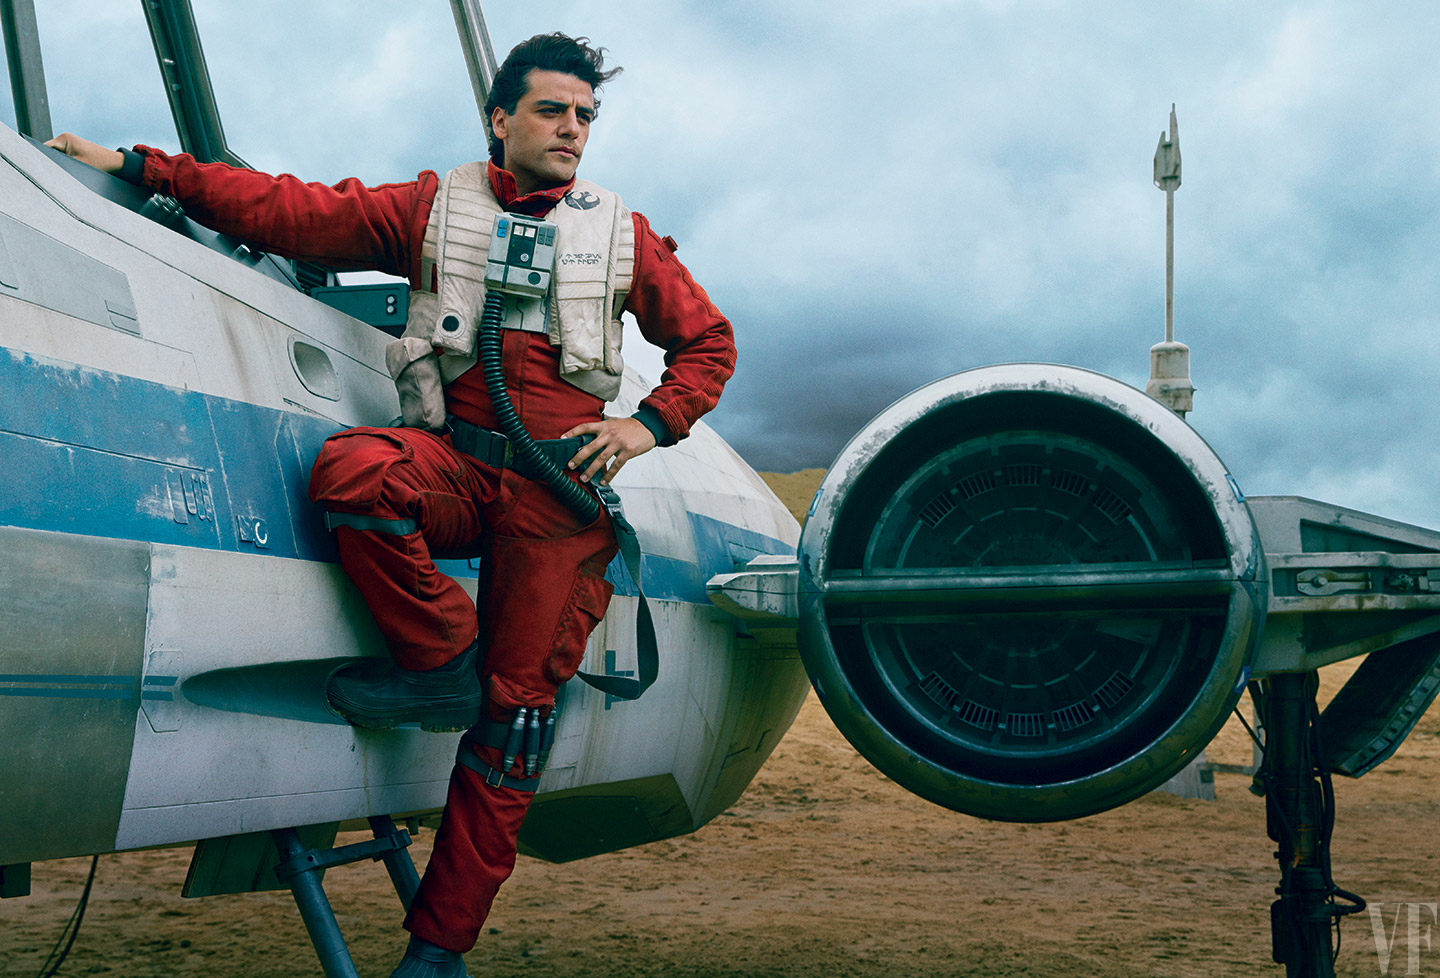 Star Wars The Force Awakens Exclusive Behind Scenes Photographs